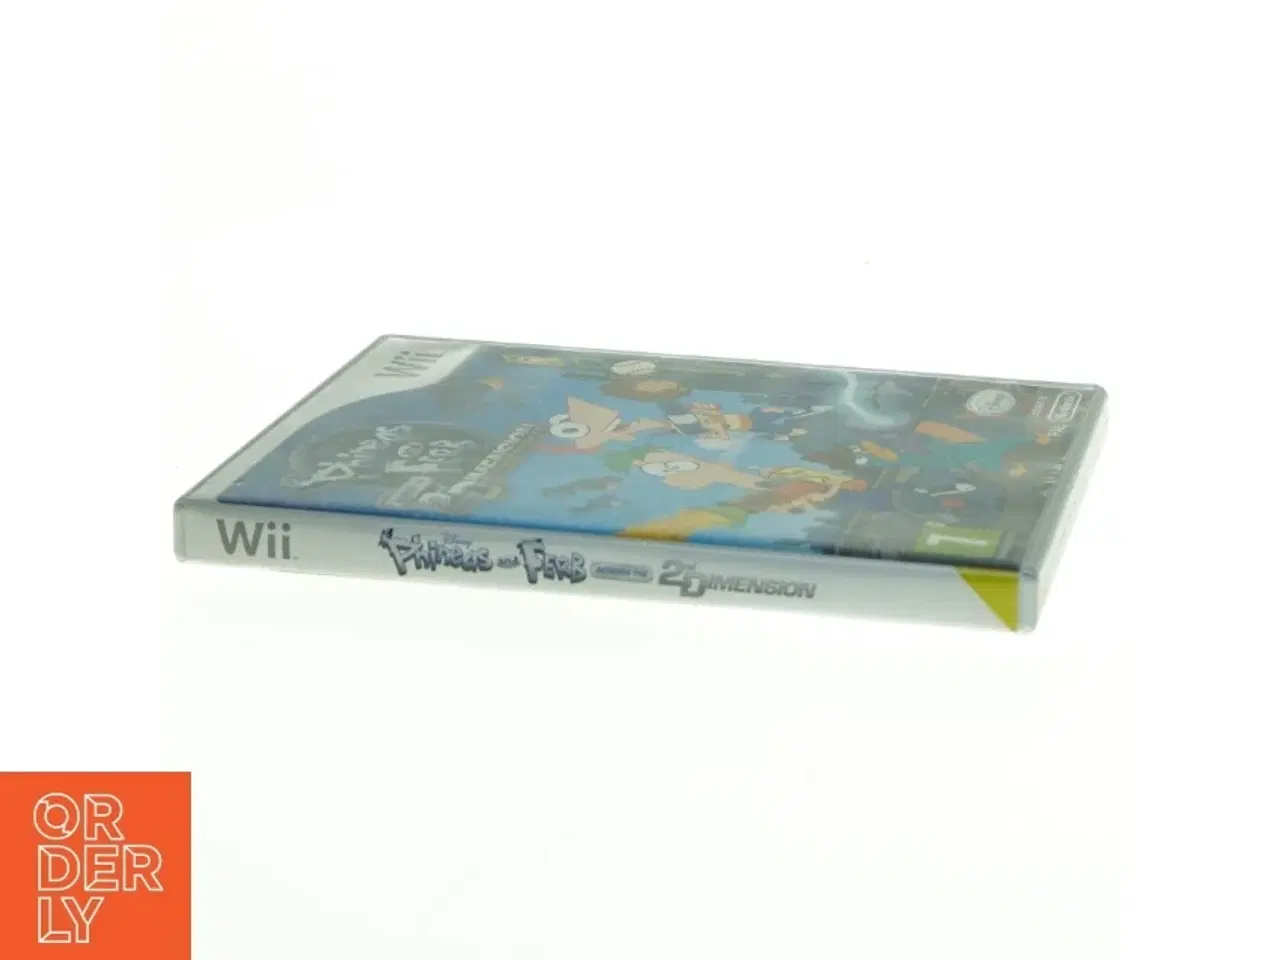 Billede 2 - Phineas and Ferb: Across the 2nd Dimension Wii spil fra Wii (str. 19 x 13 cm)